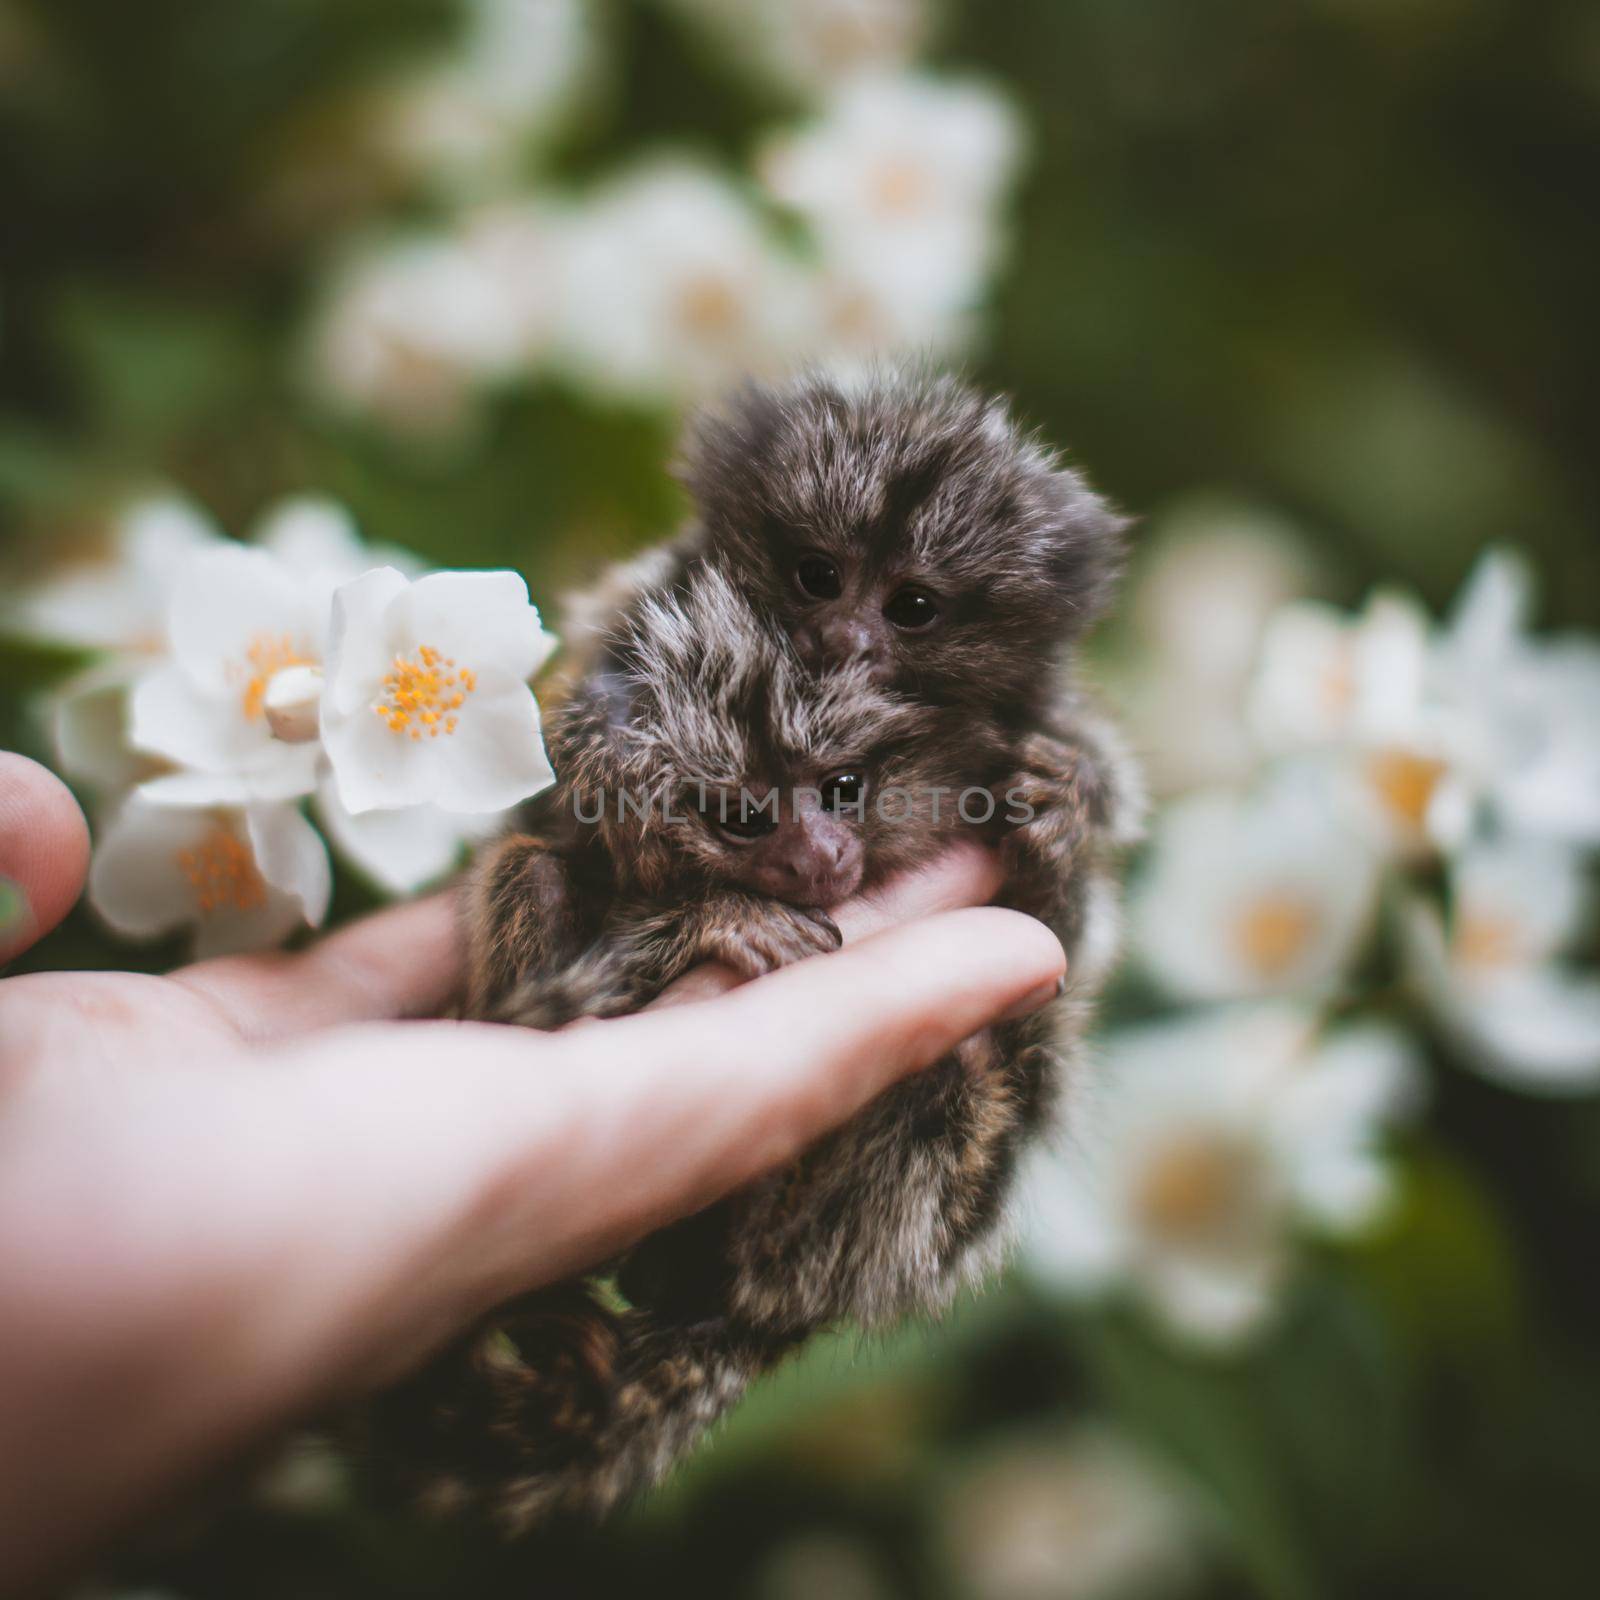 The common marmoset's babies on hand with philadelphus flower bush by RosaJay